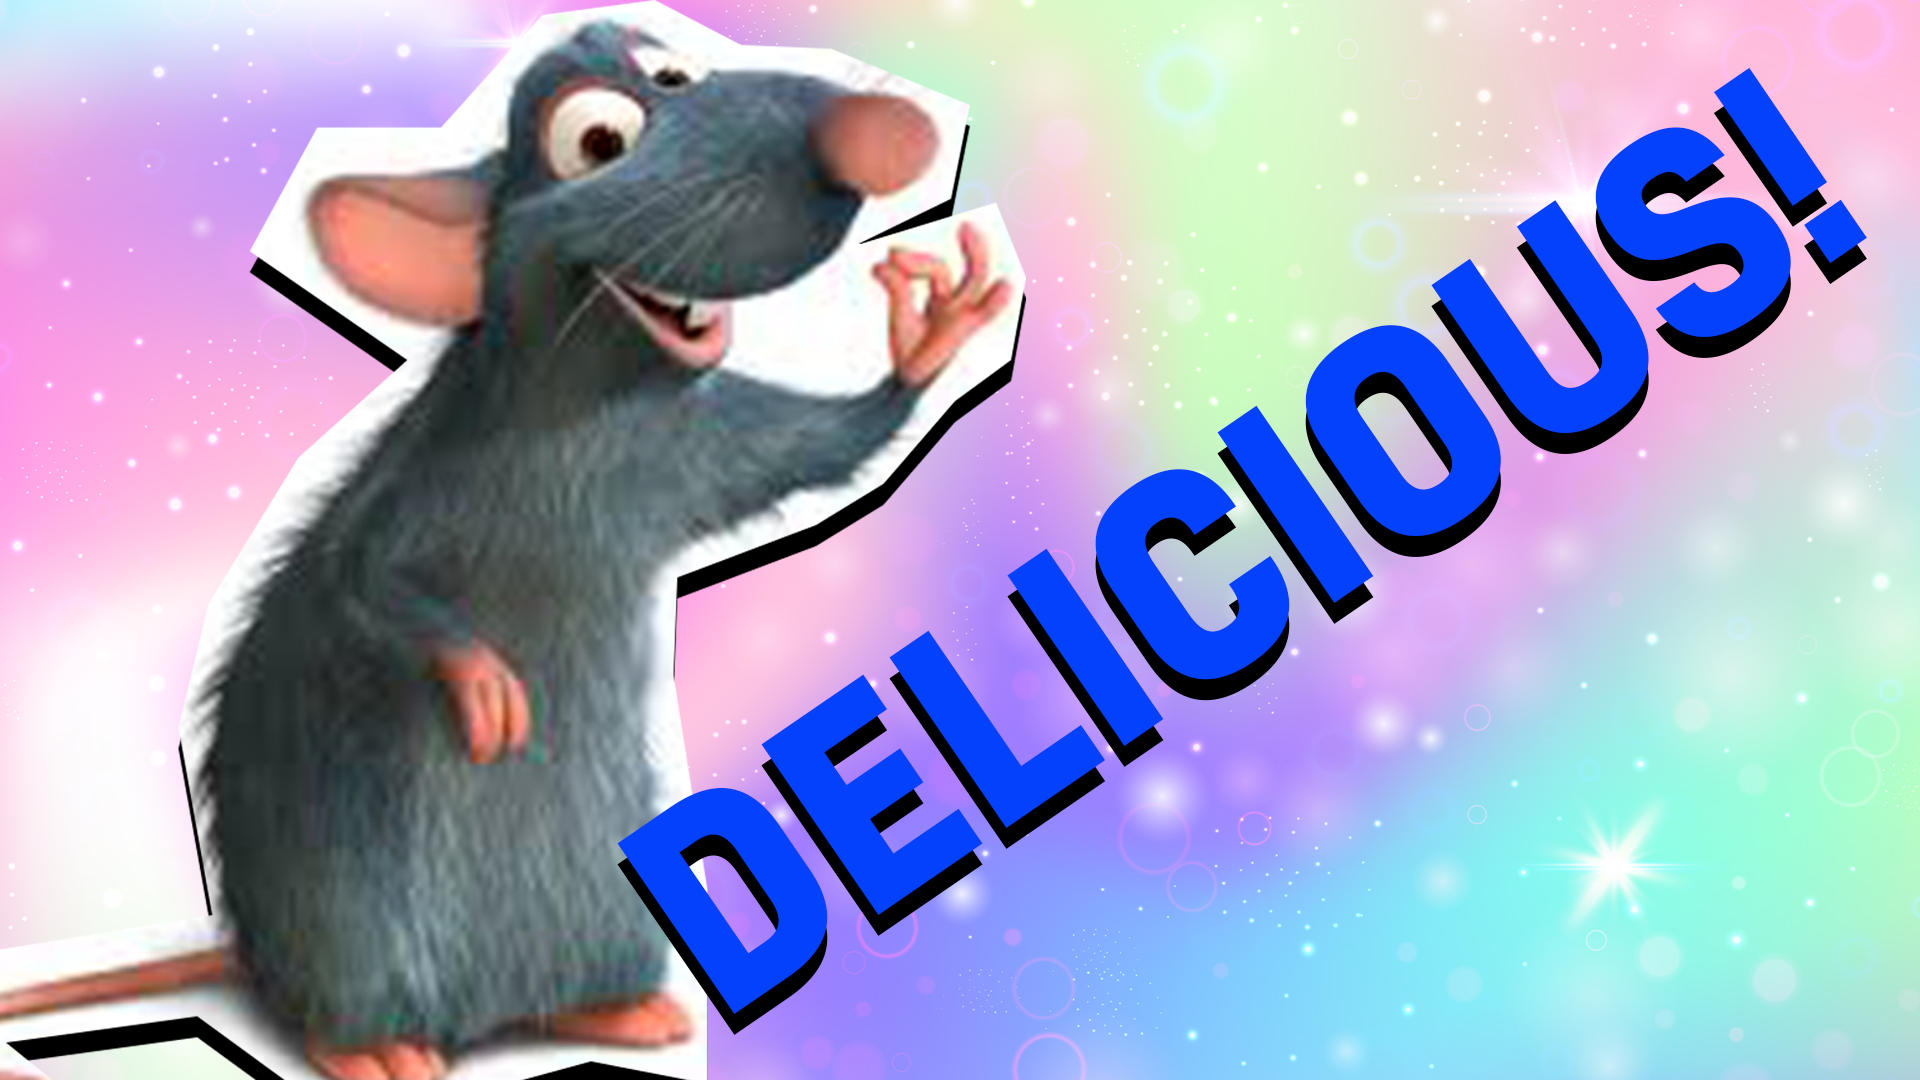 Remy and the word delicious